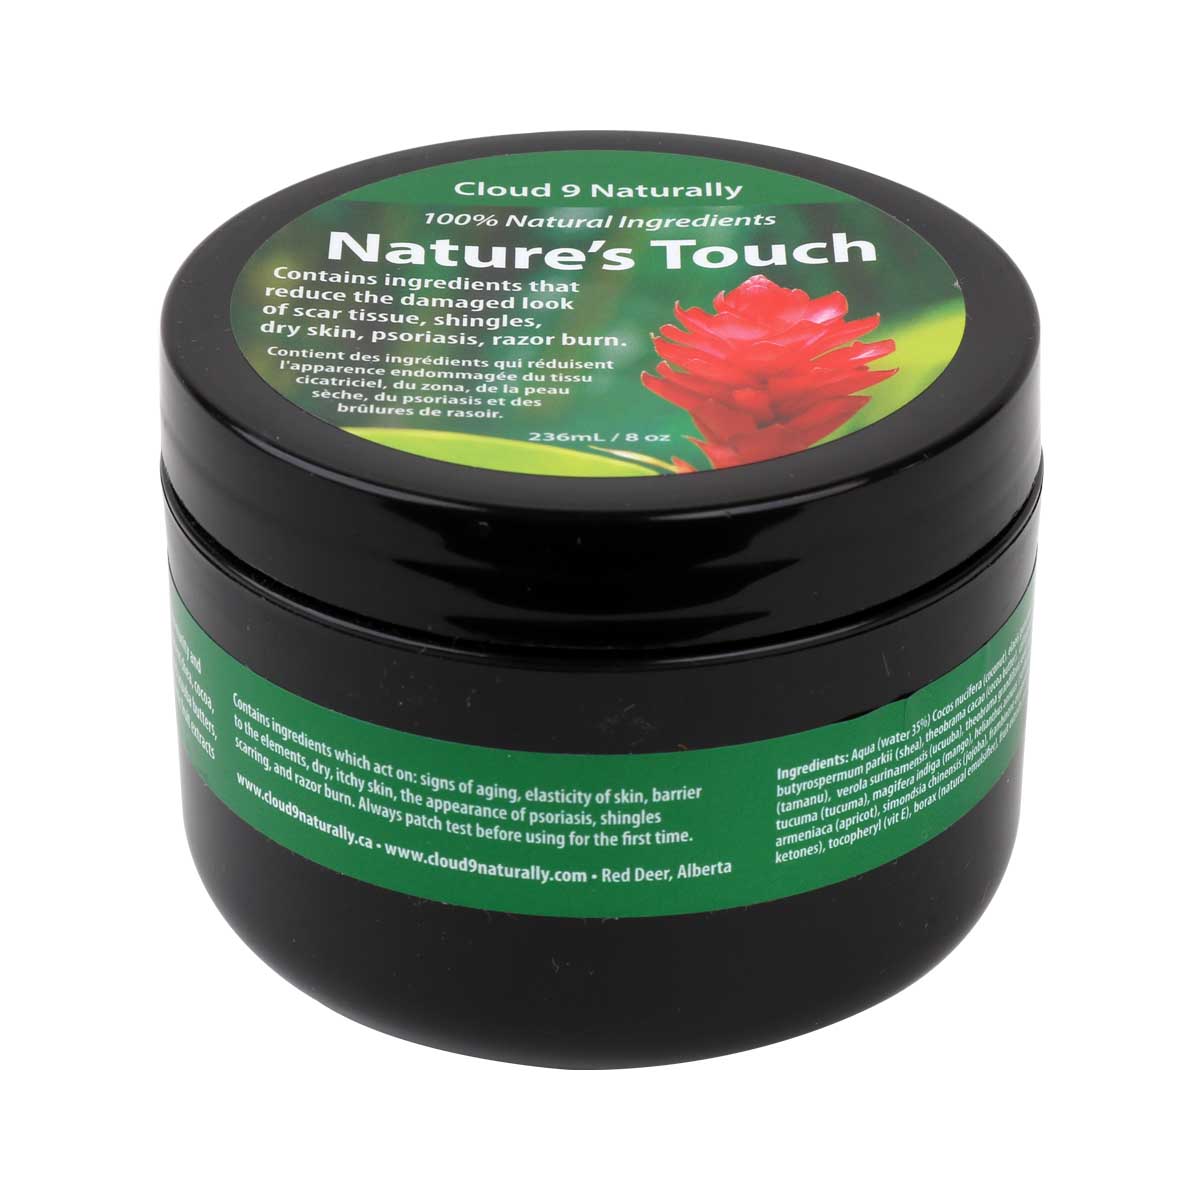 Cloud 9 Naturally Nature's Touch 236ML